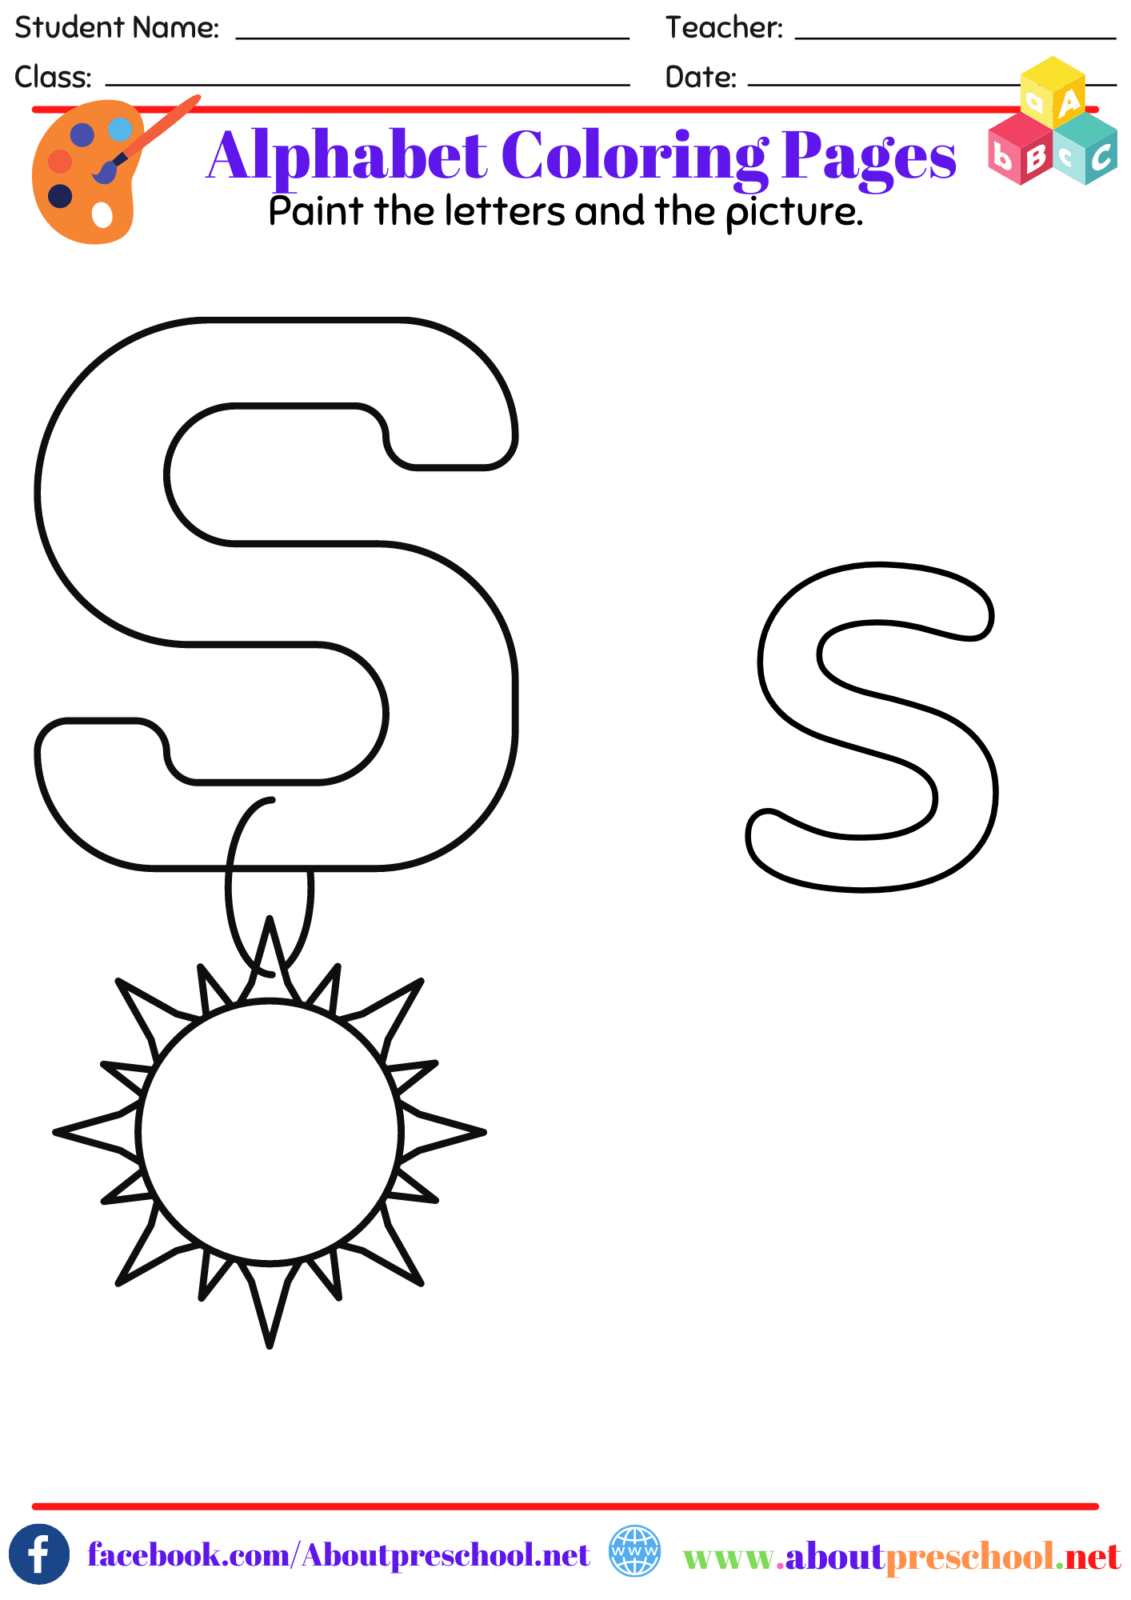 Alphabet Coloring Pages-s